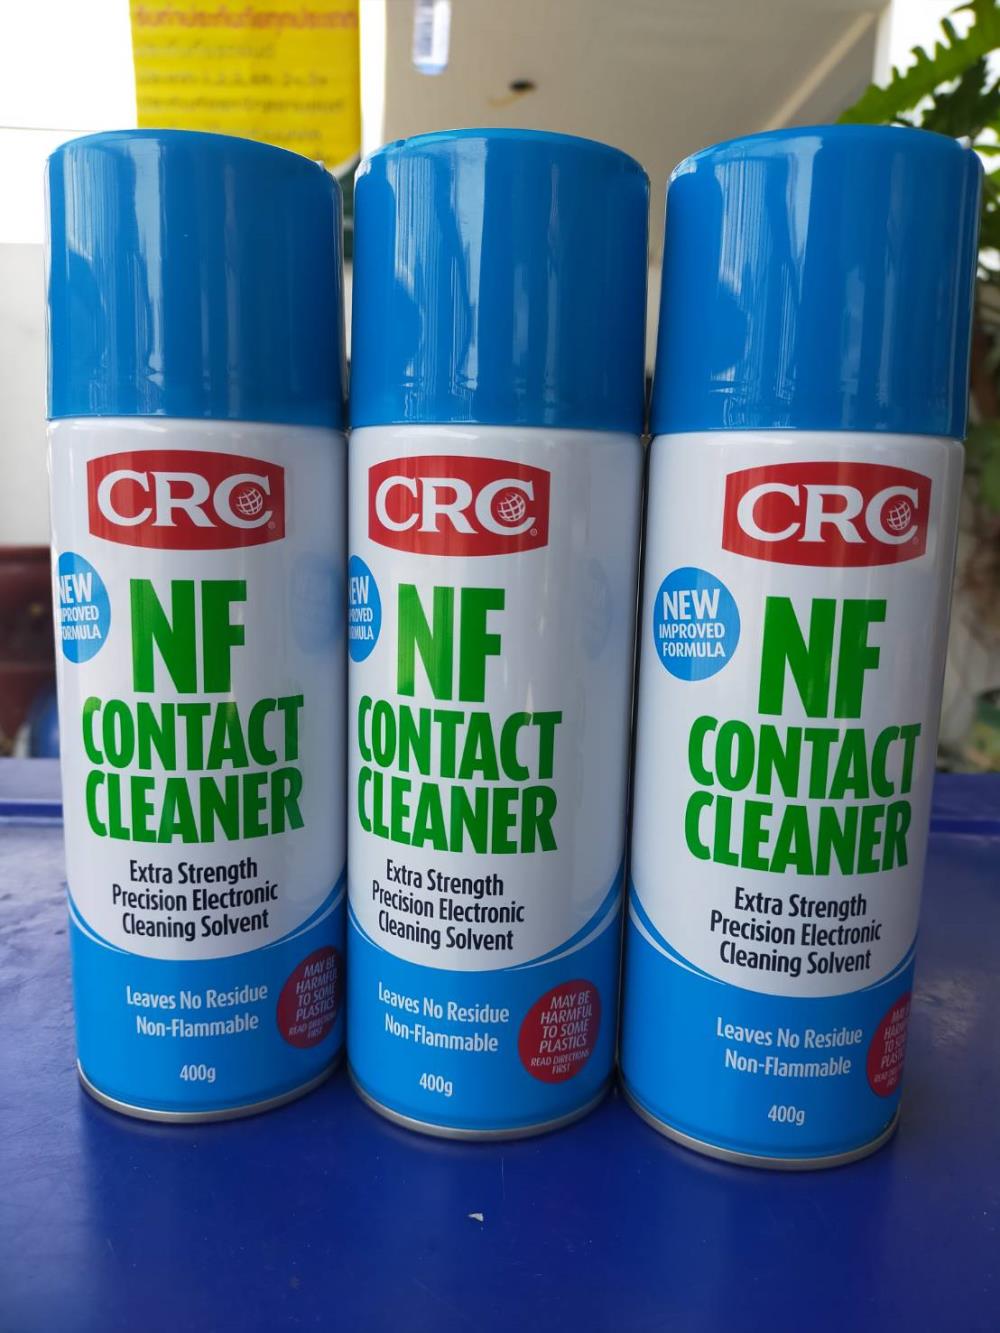 NF CONTACT CLEANER,น้ำยาล้างอุกรณ์ไฟฟ้า,CRC,Hardware and Consumable/General Hardware